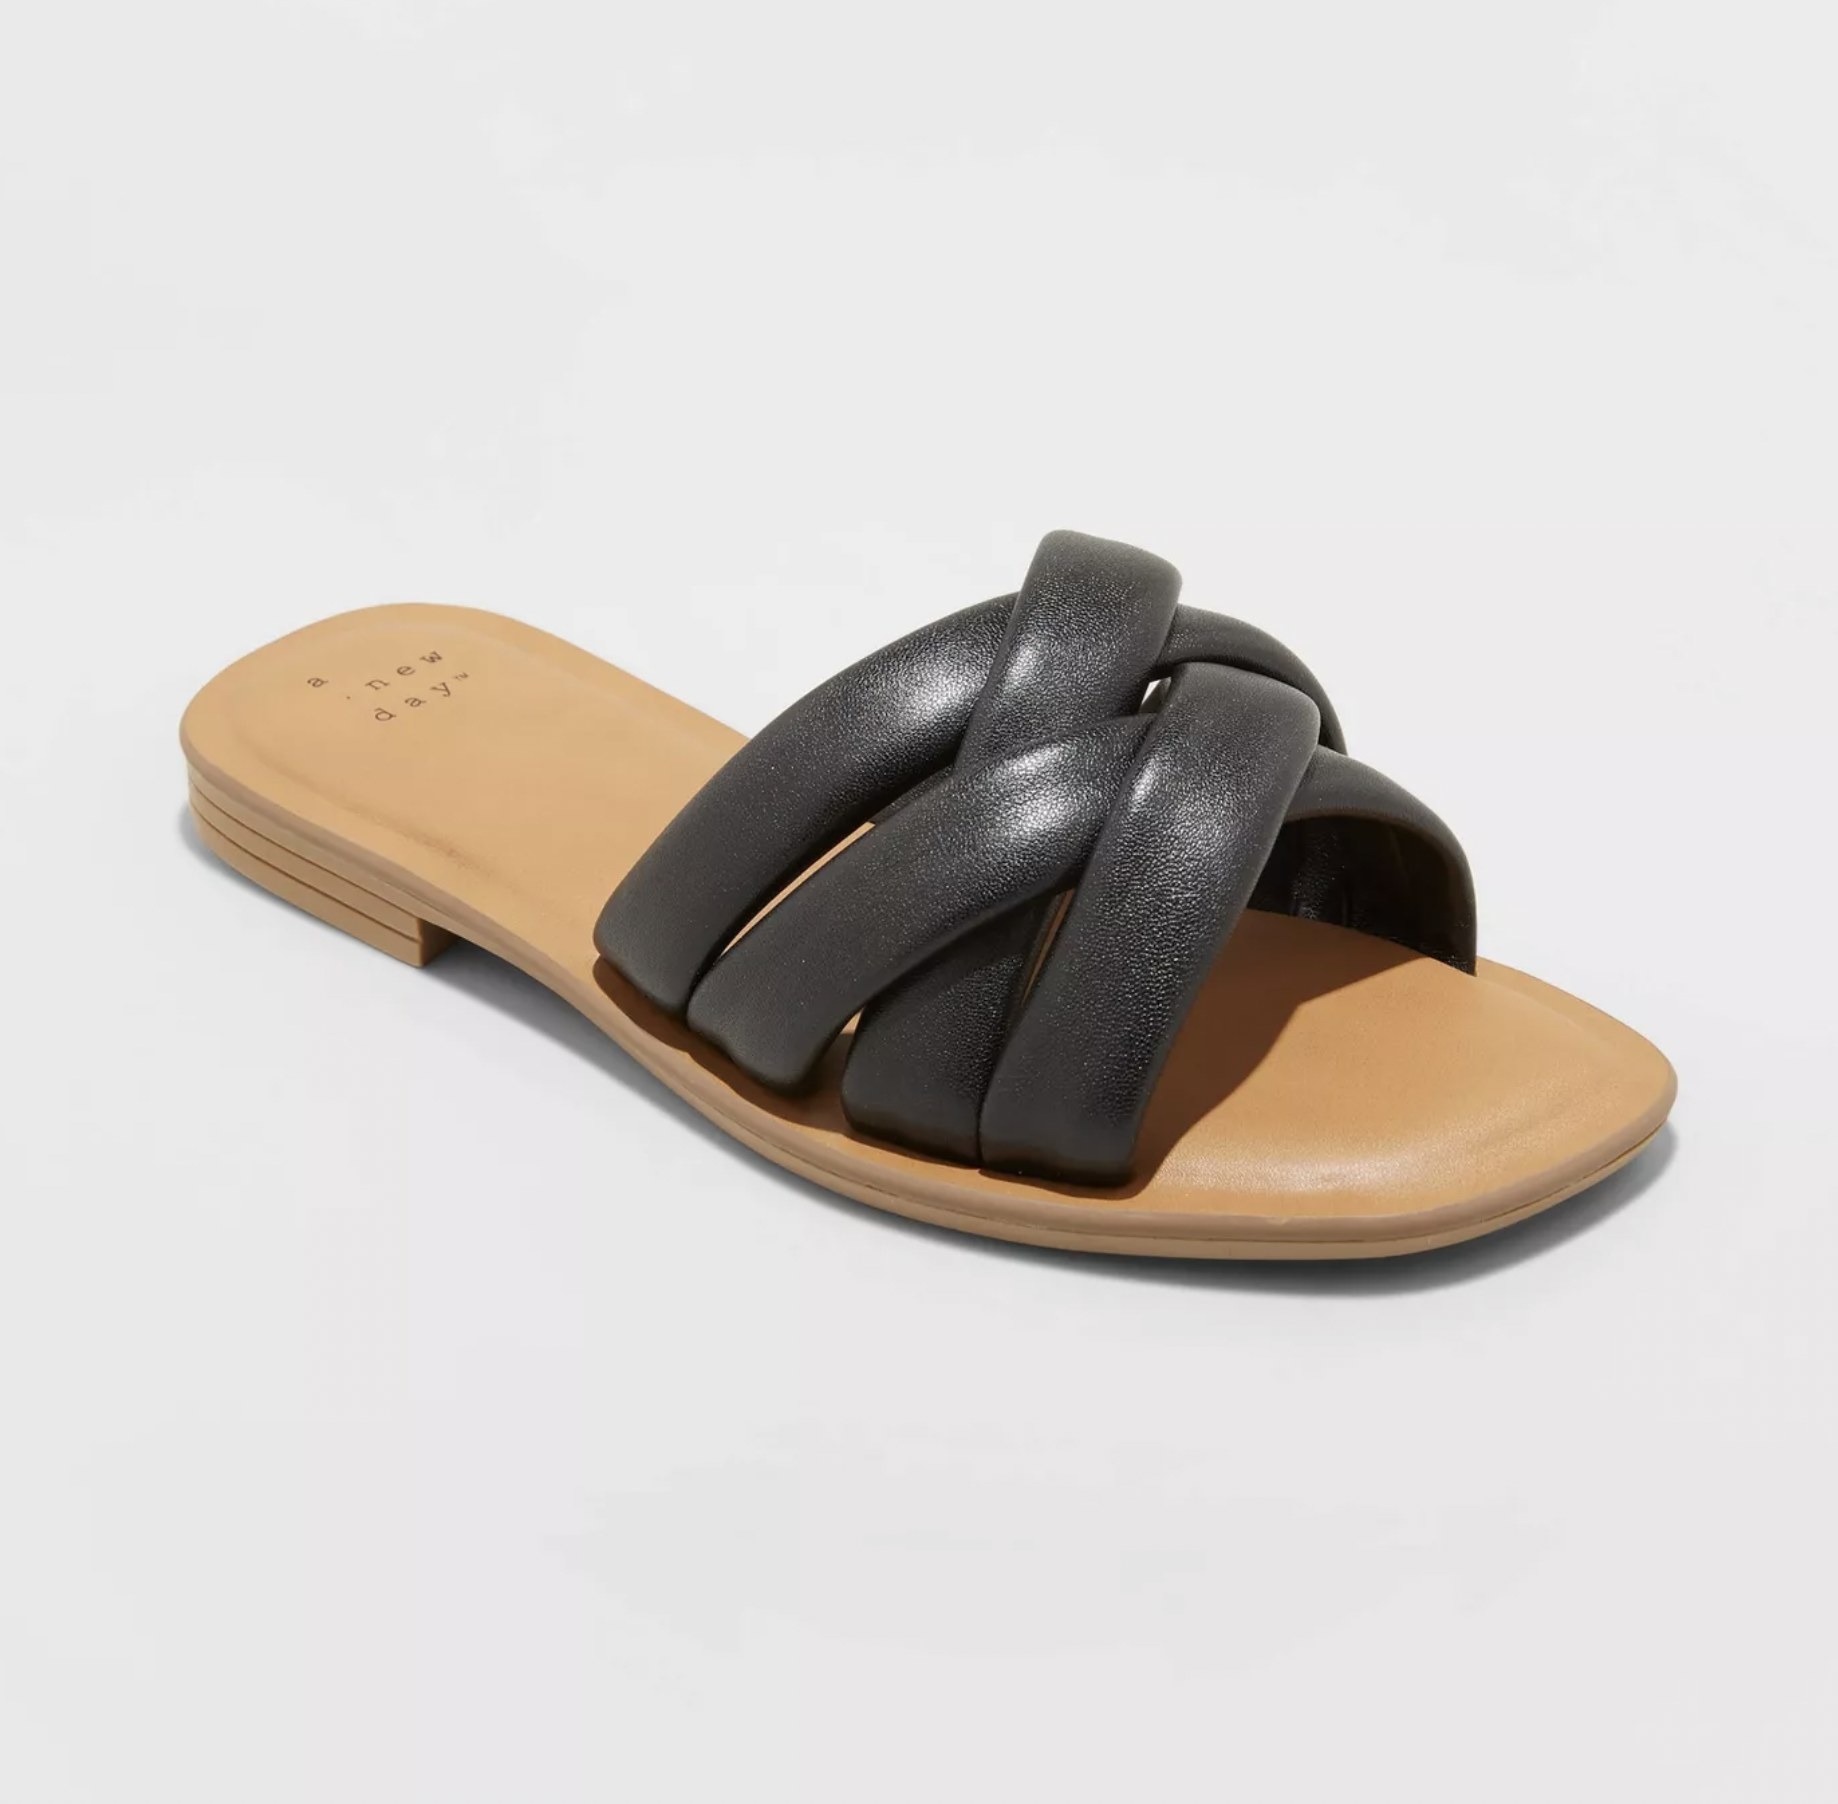 The black padded sandals